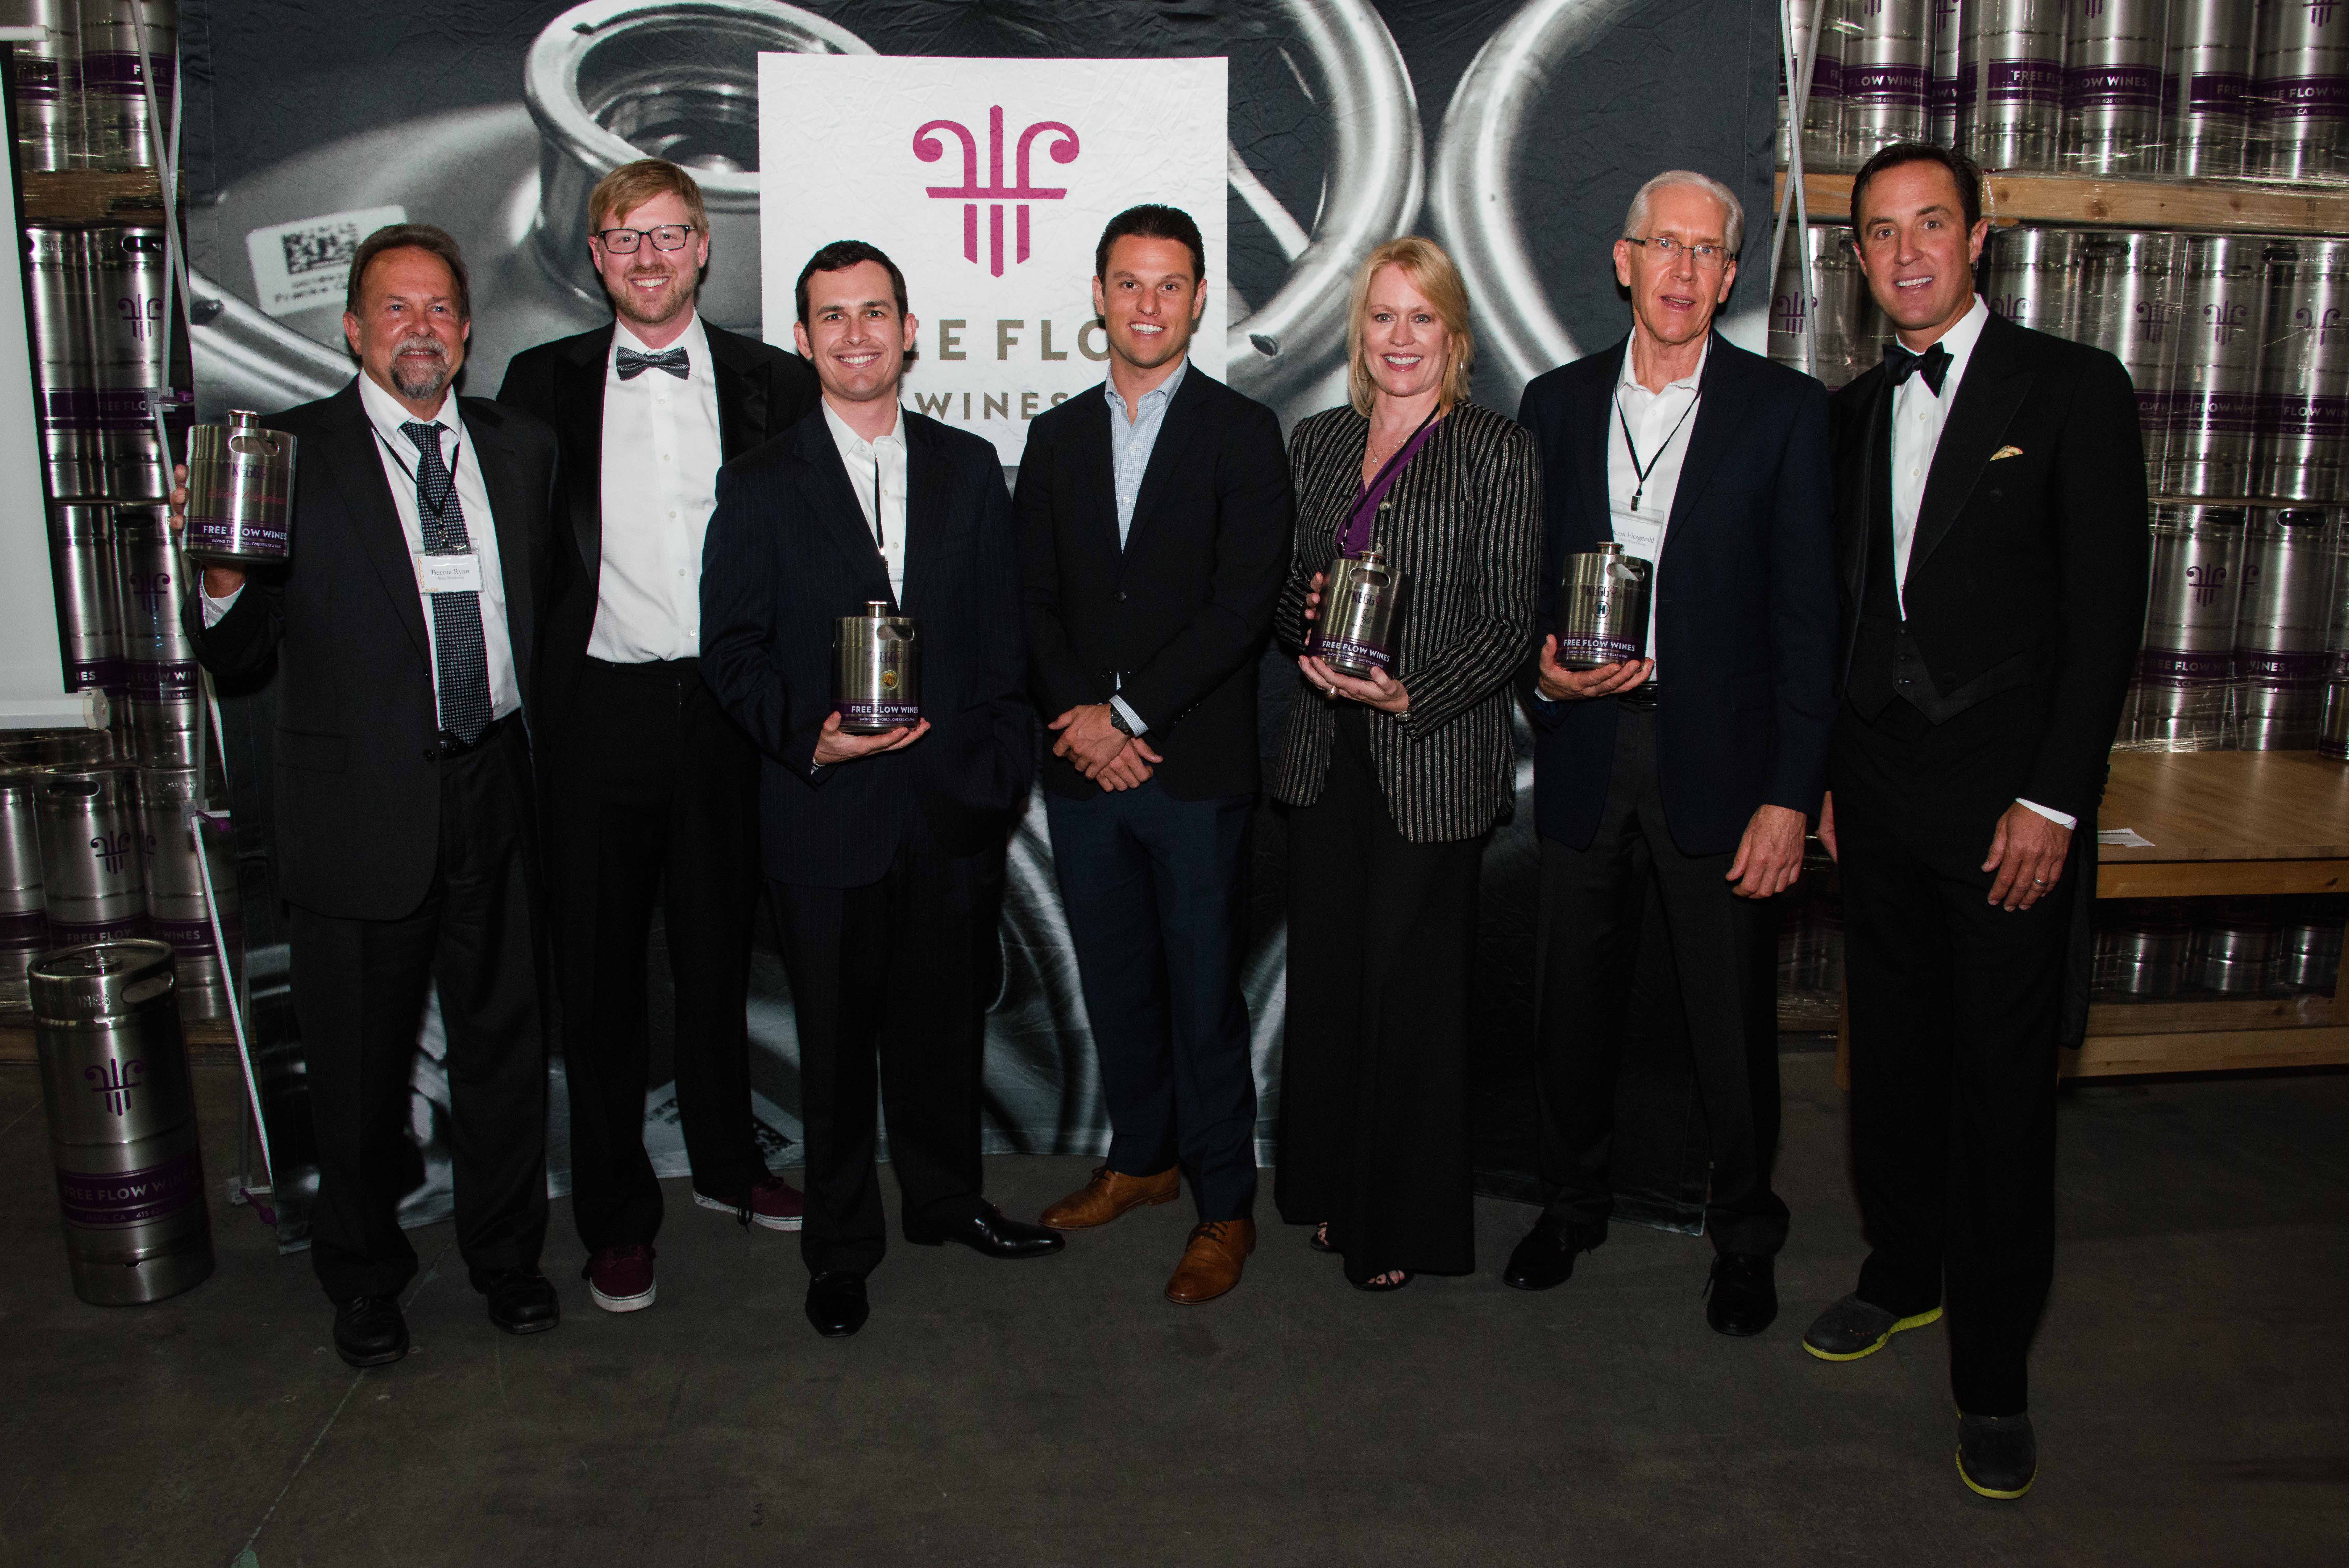 KEGGY Distributor Awards: Southern Wine & Spirits of Ca., Young’s Market of California, Southern Wine & Spirits of Nevada, RNDC Texas, the Henry Wine Group, and Wine Warehouse of California.